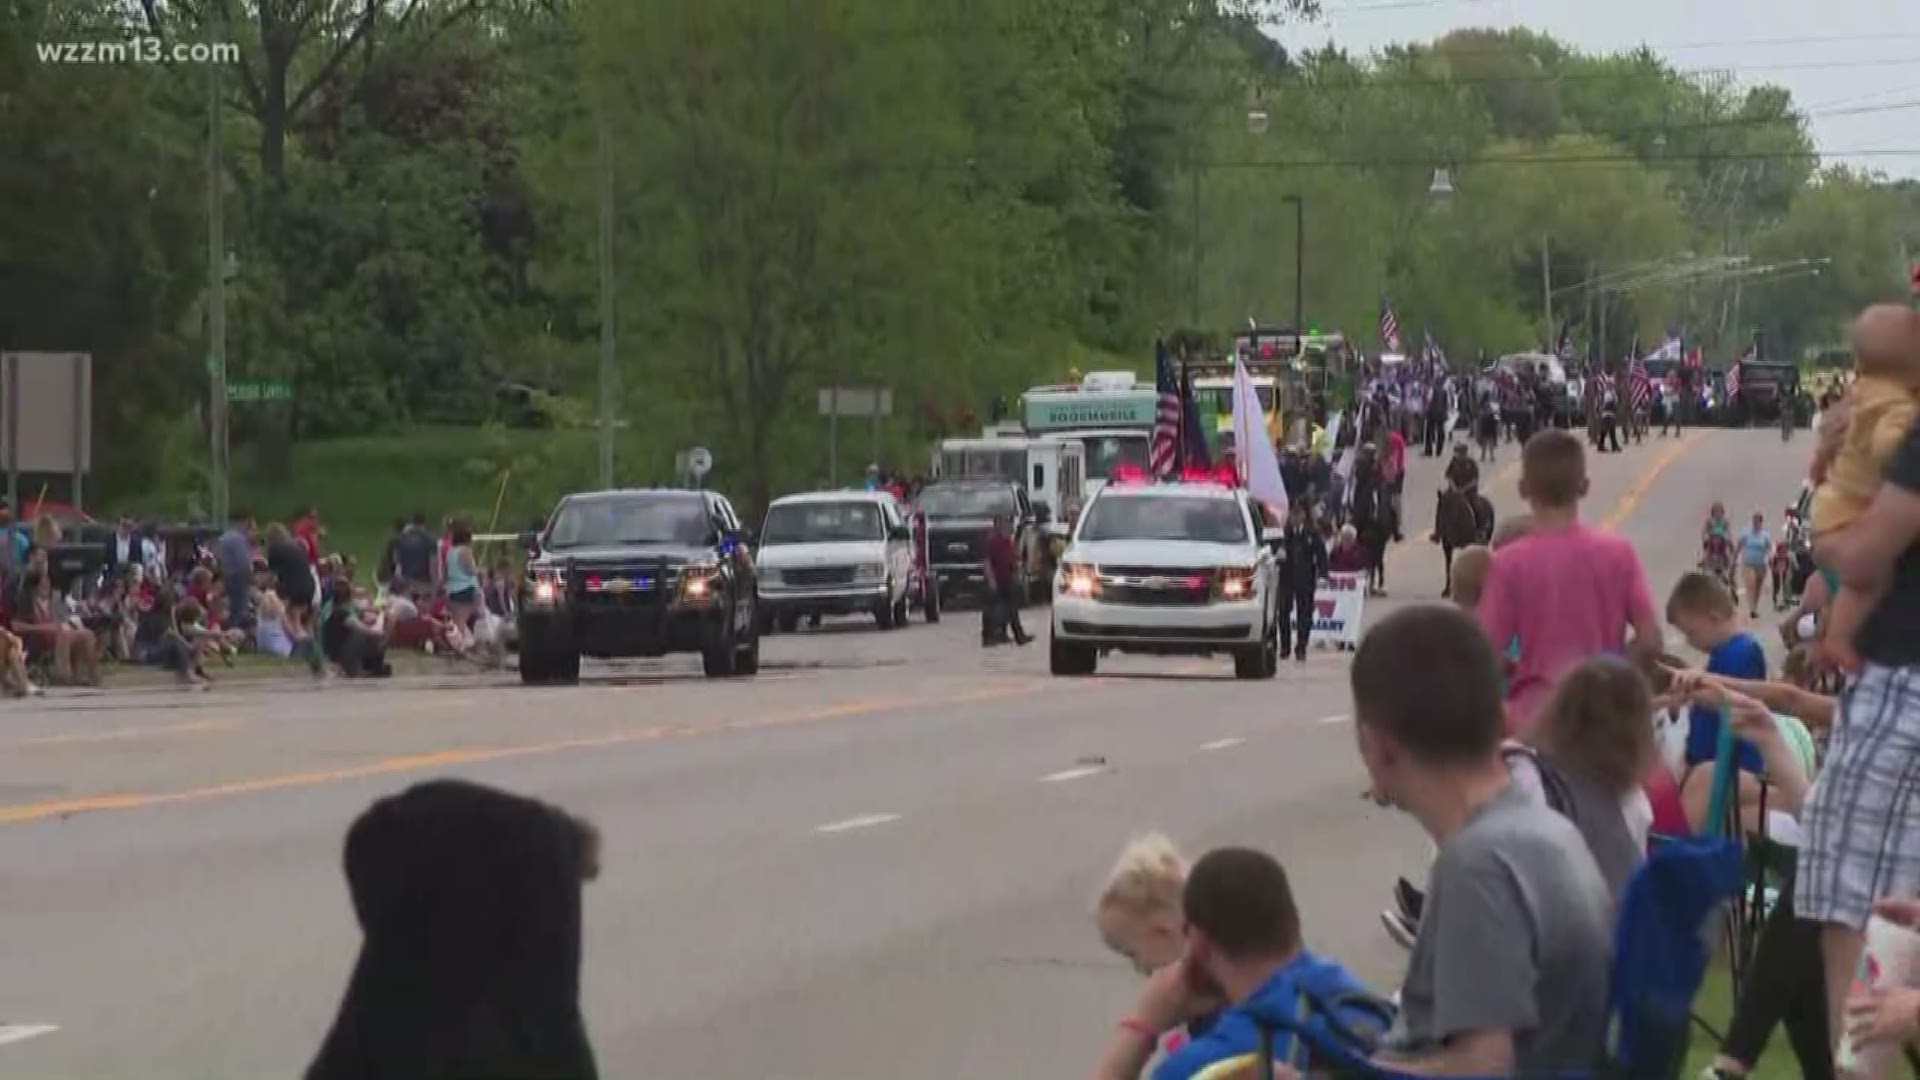 Several communities across the region held Memorial Day parades and ceremonies to honor those who made the ultimate sacrifice to protect their country.